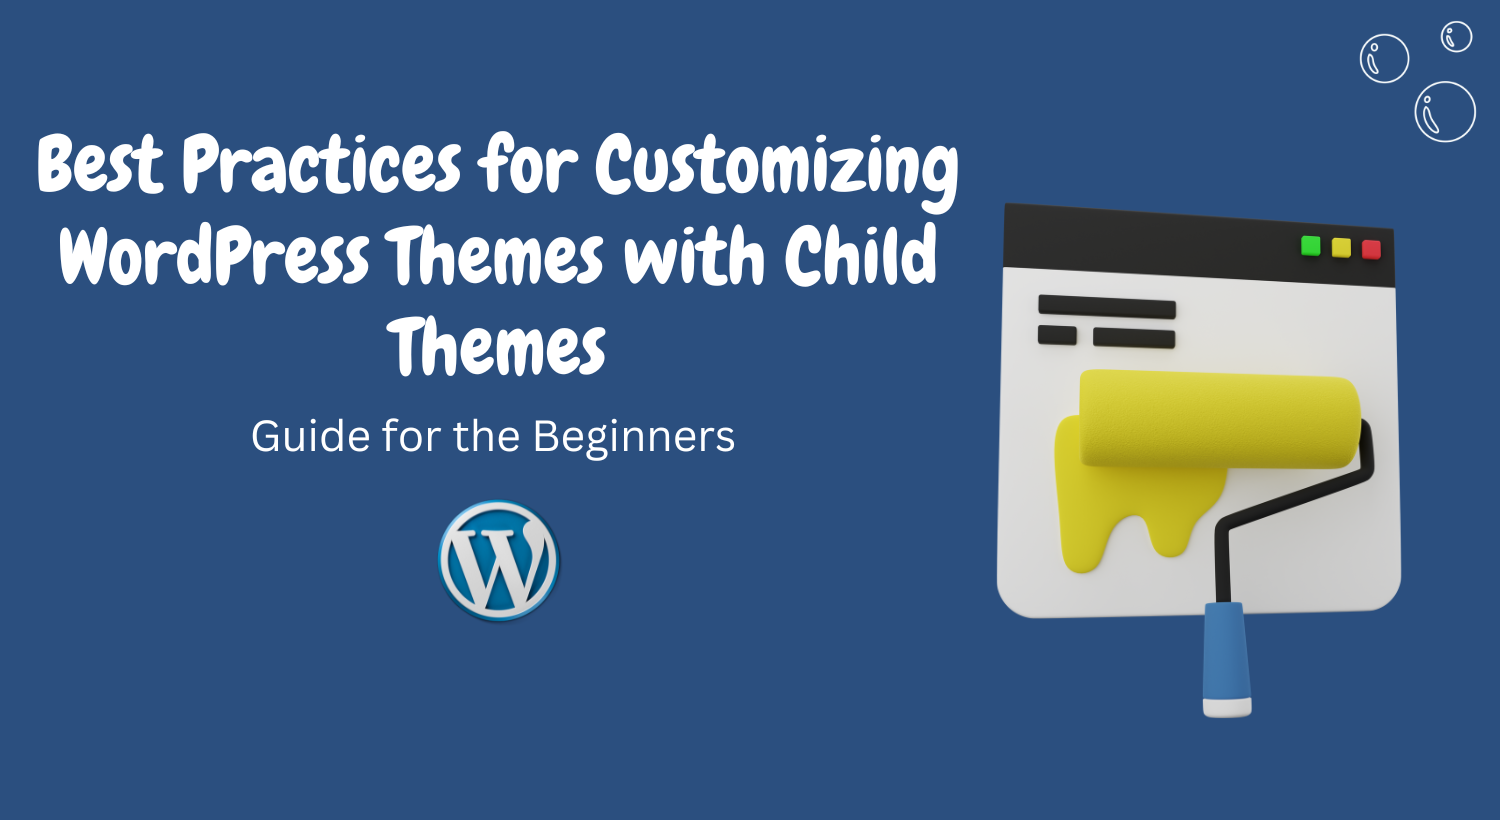 WordPress Themes with Child Themes